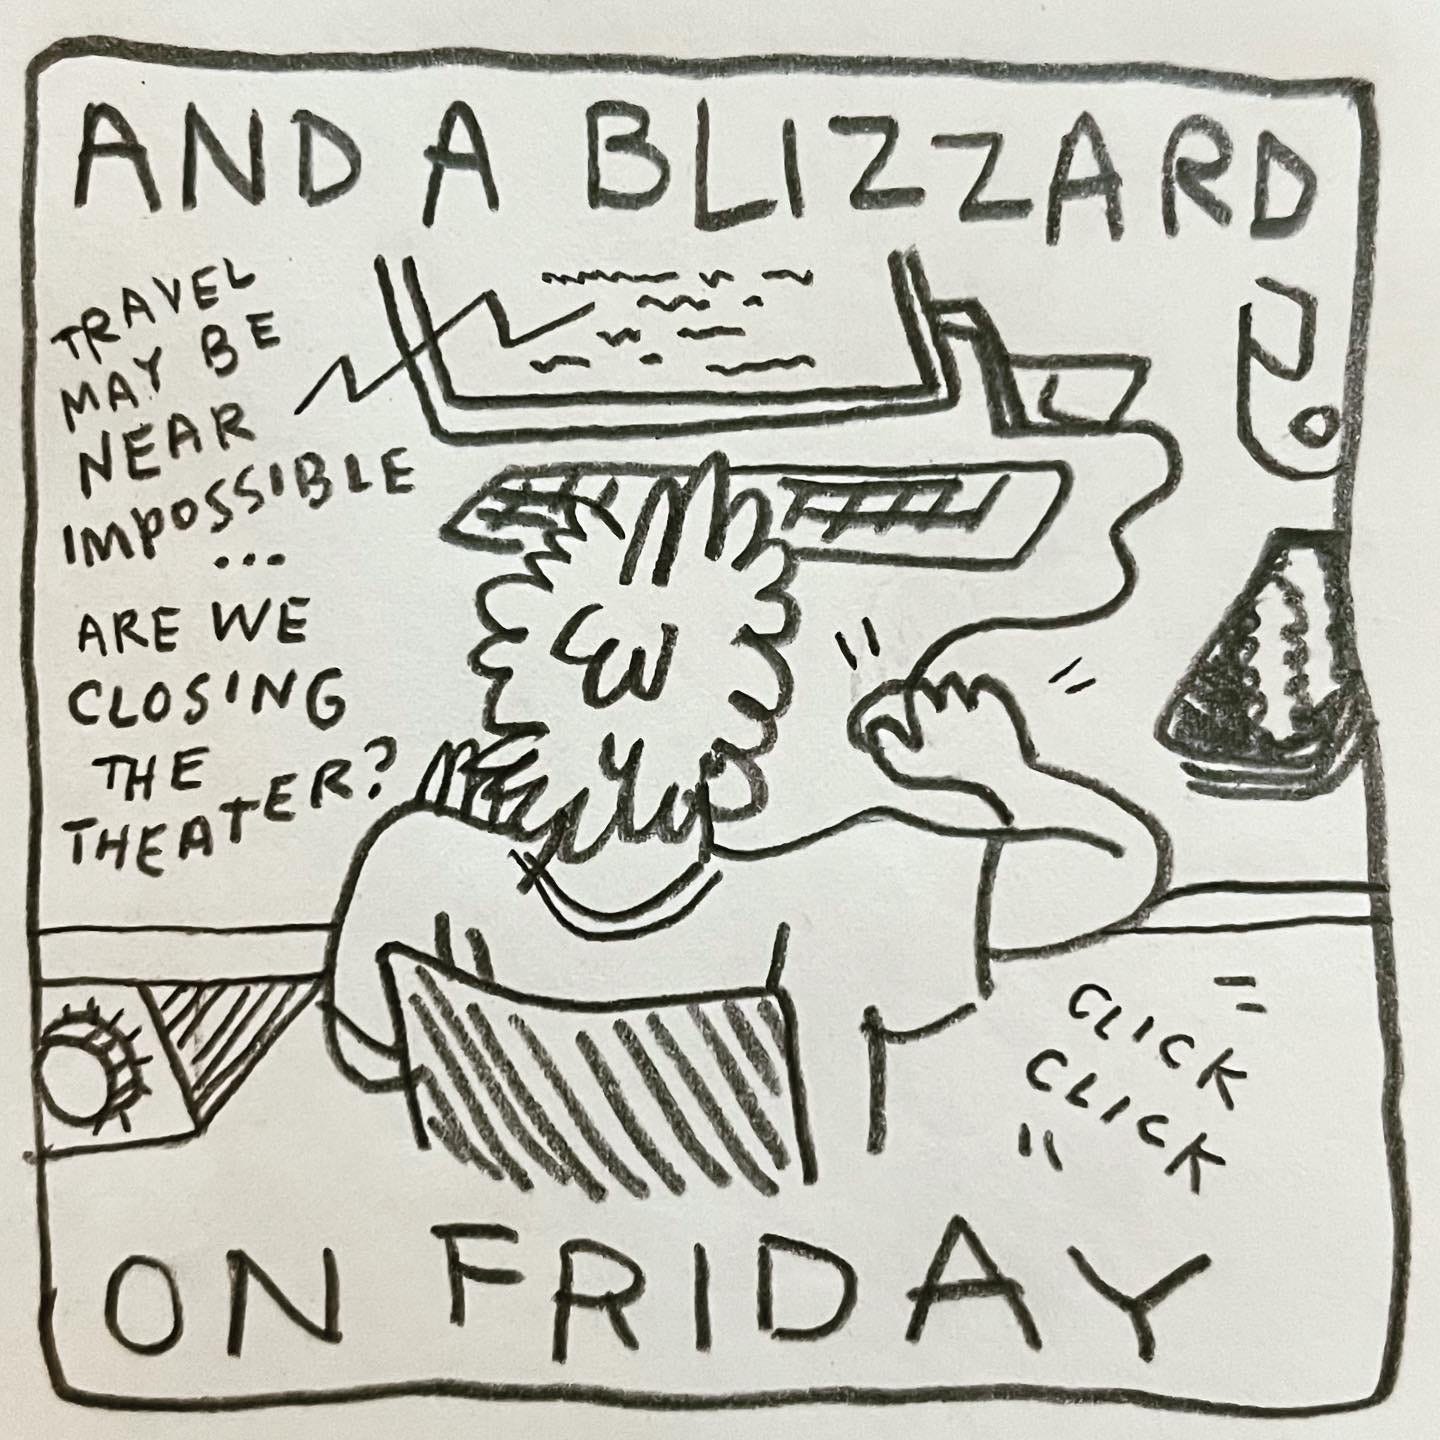 Panel 2: and a blizzard on Friday Image: We see Lark's head from behind, looking at a desktop computer and moving the mouse. They are reading the text of an email that says, "travel may be near impossible… are we closing the theater?"